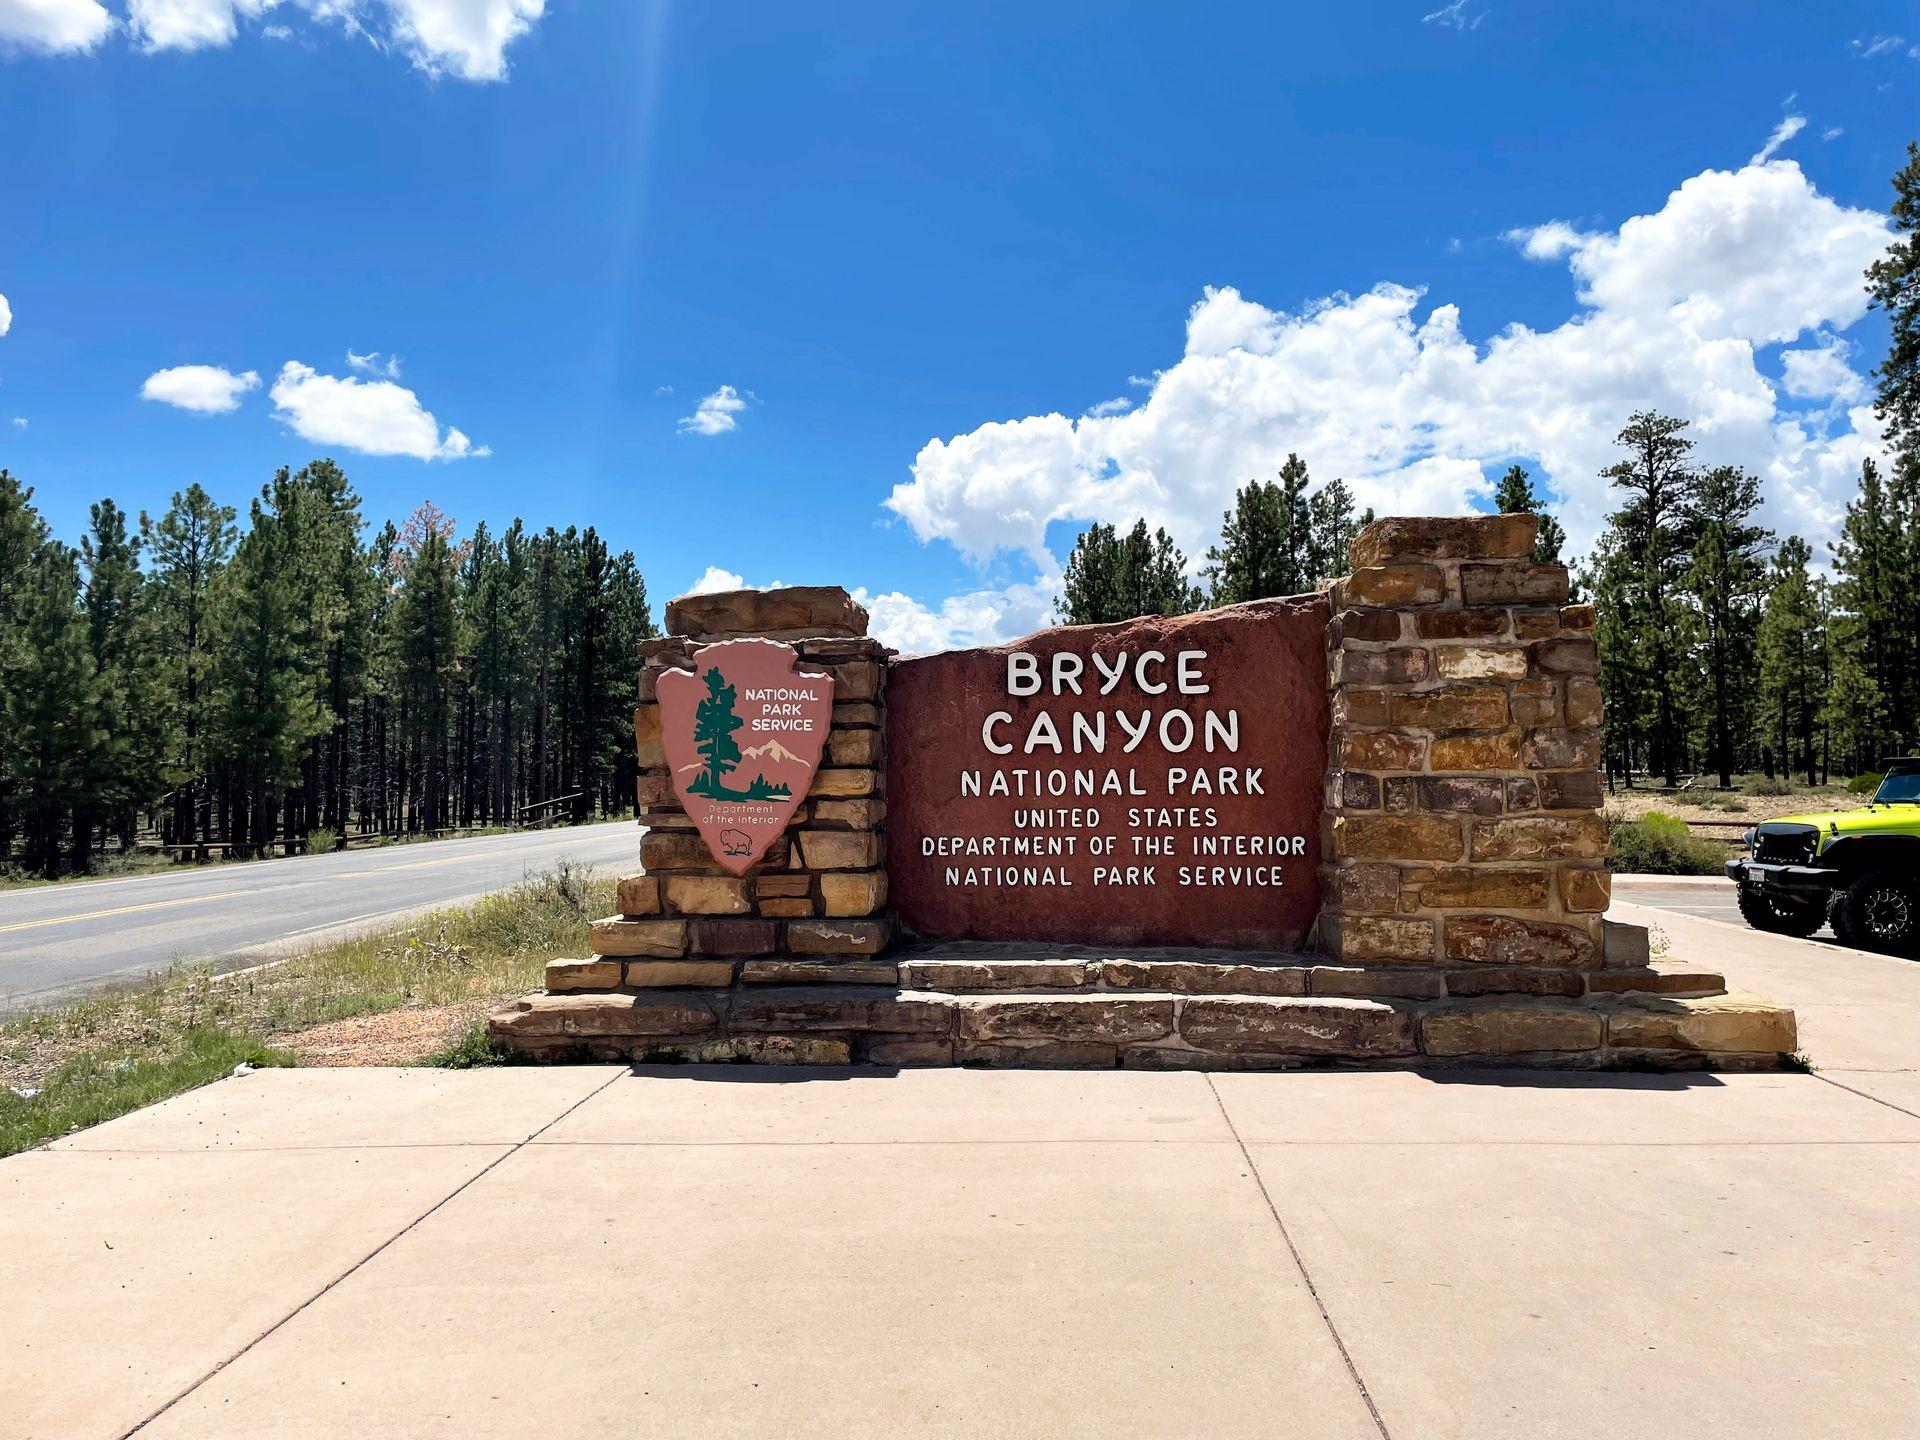 The entrance sign for Bryce Canyon National Park.